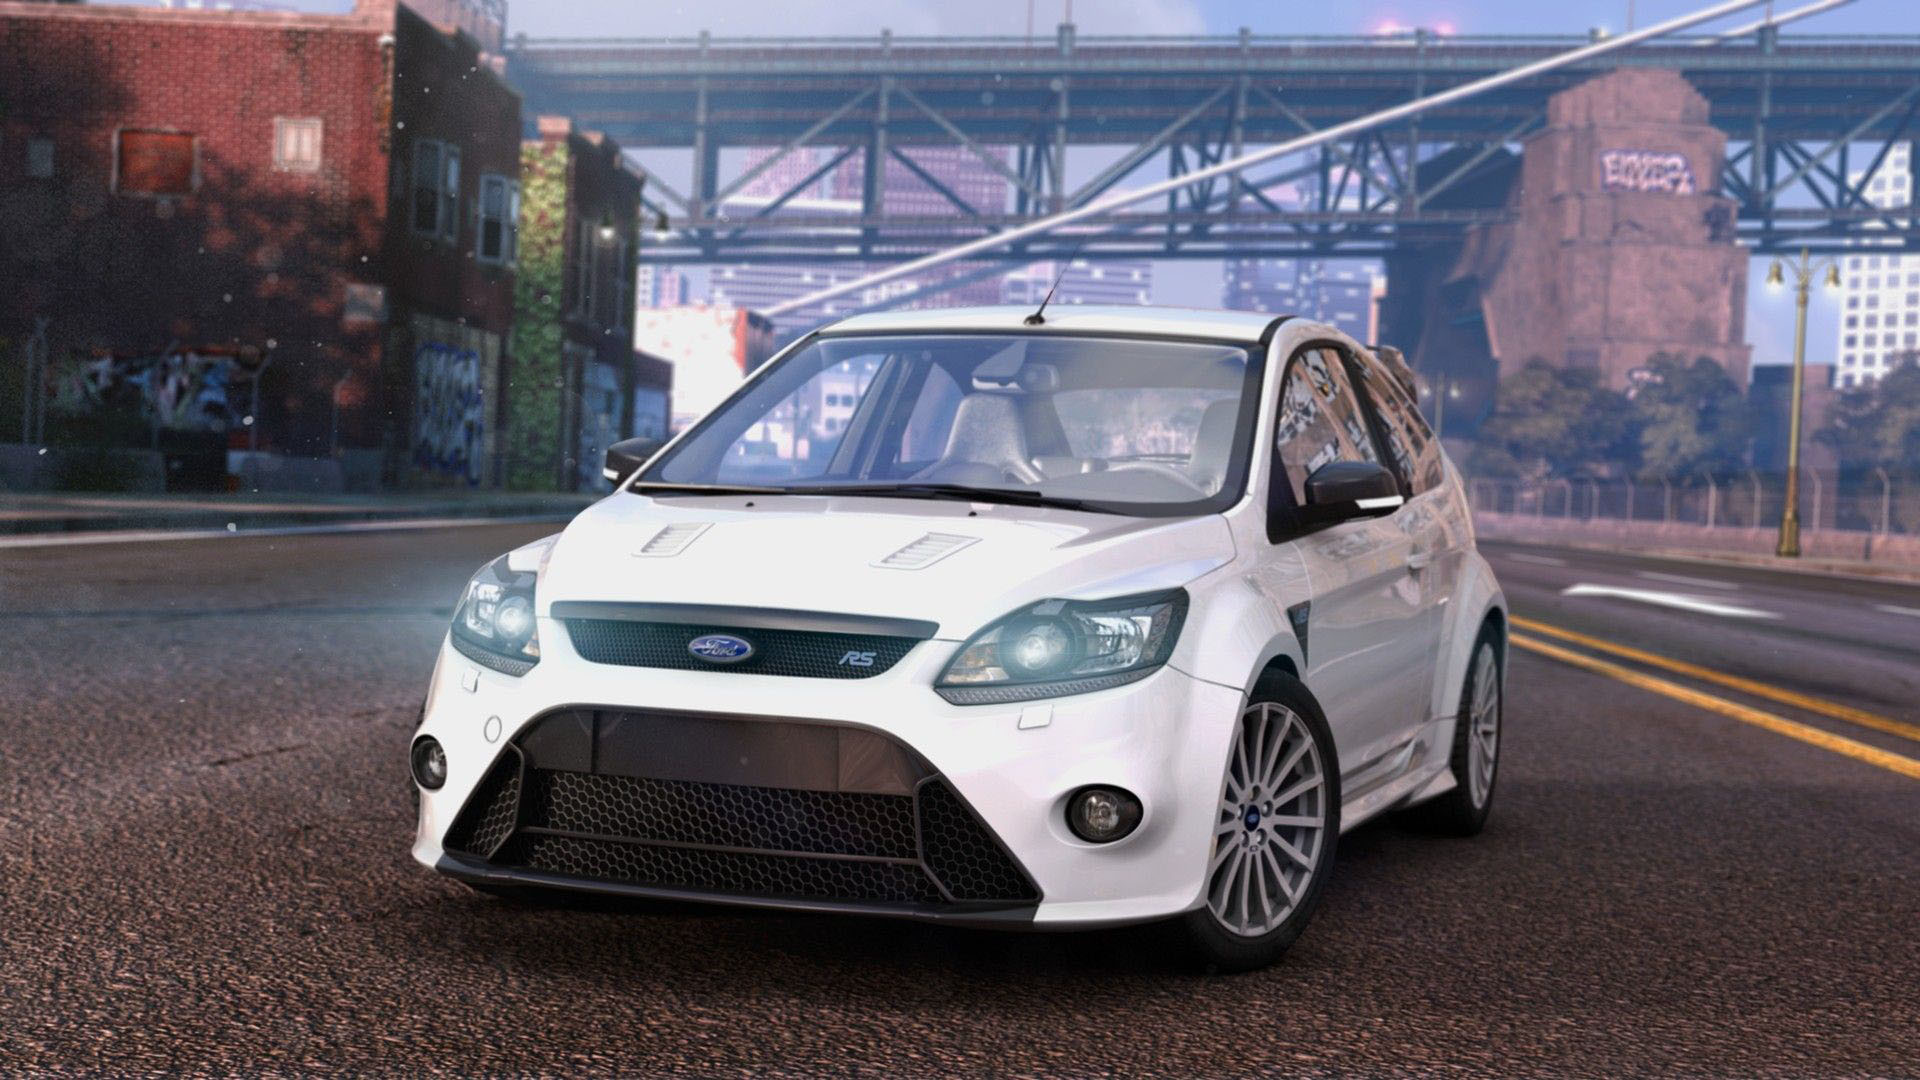 1920x1080 The Crew - 2010 Ford Focus RS  wallpaper